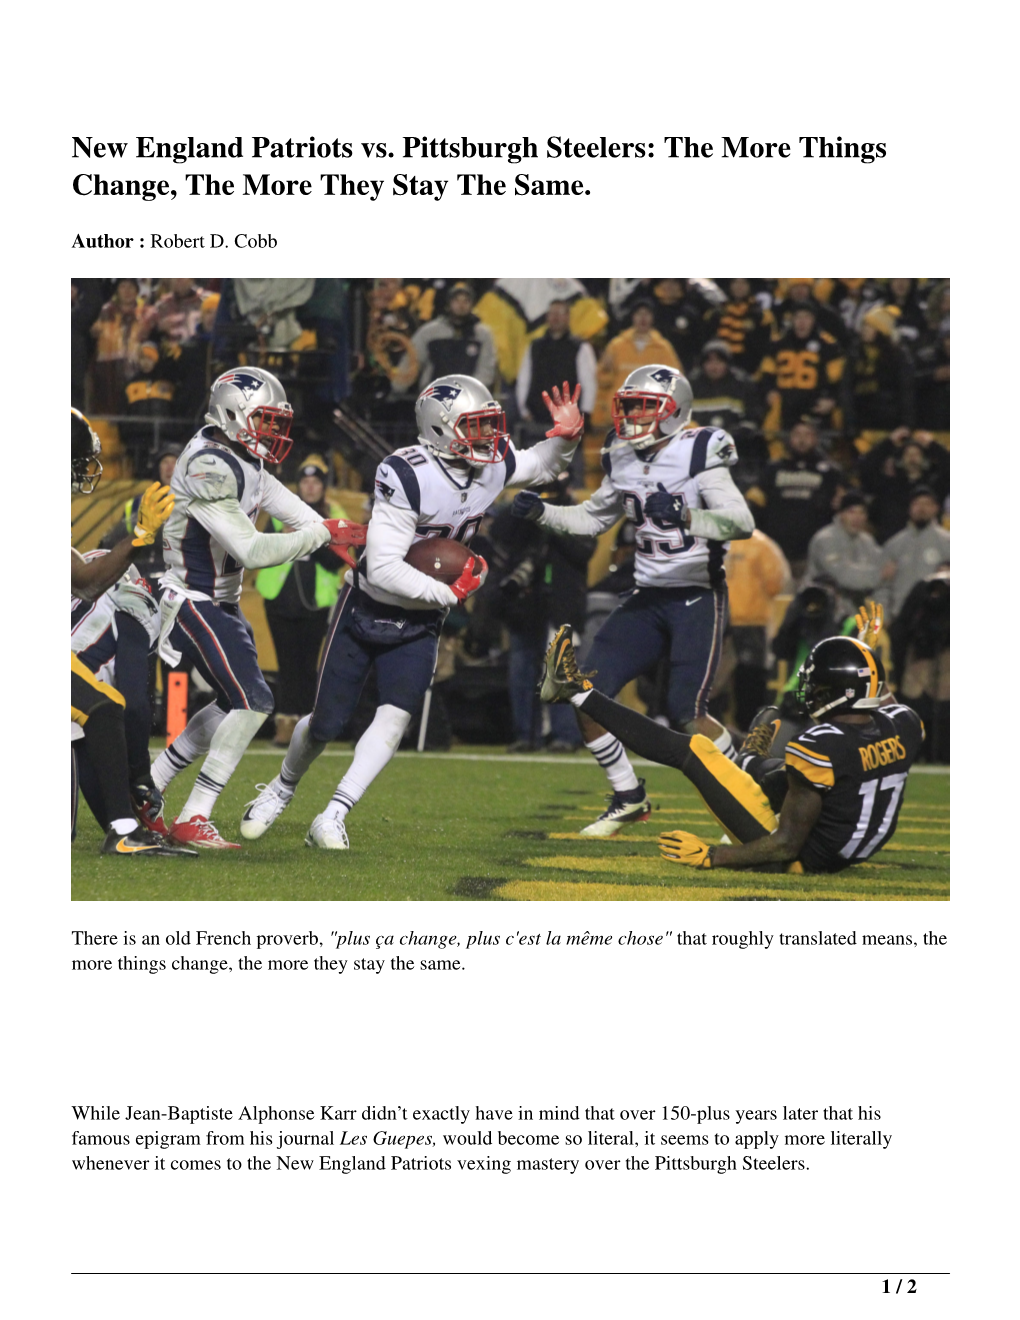 New England Patriots Vs. Pittsburgh Steelers: the More Things Change, the More They Stay the Same